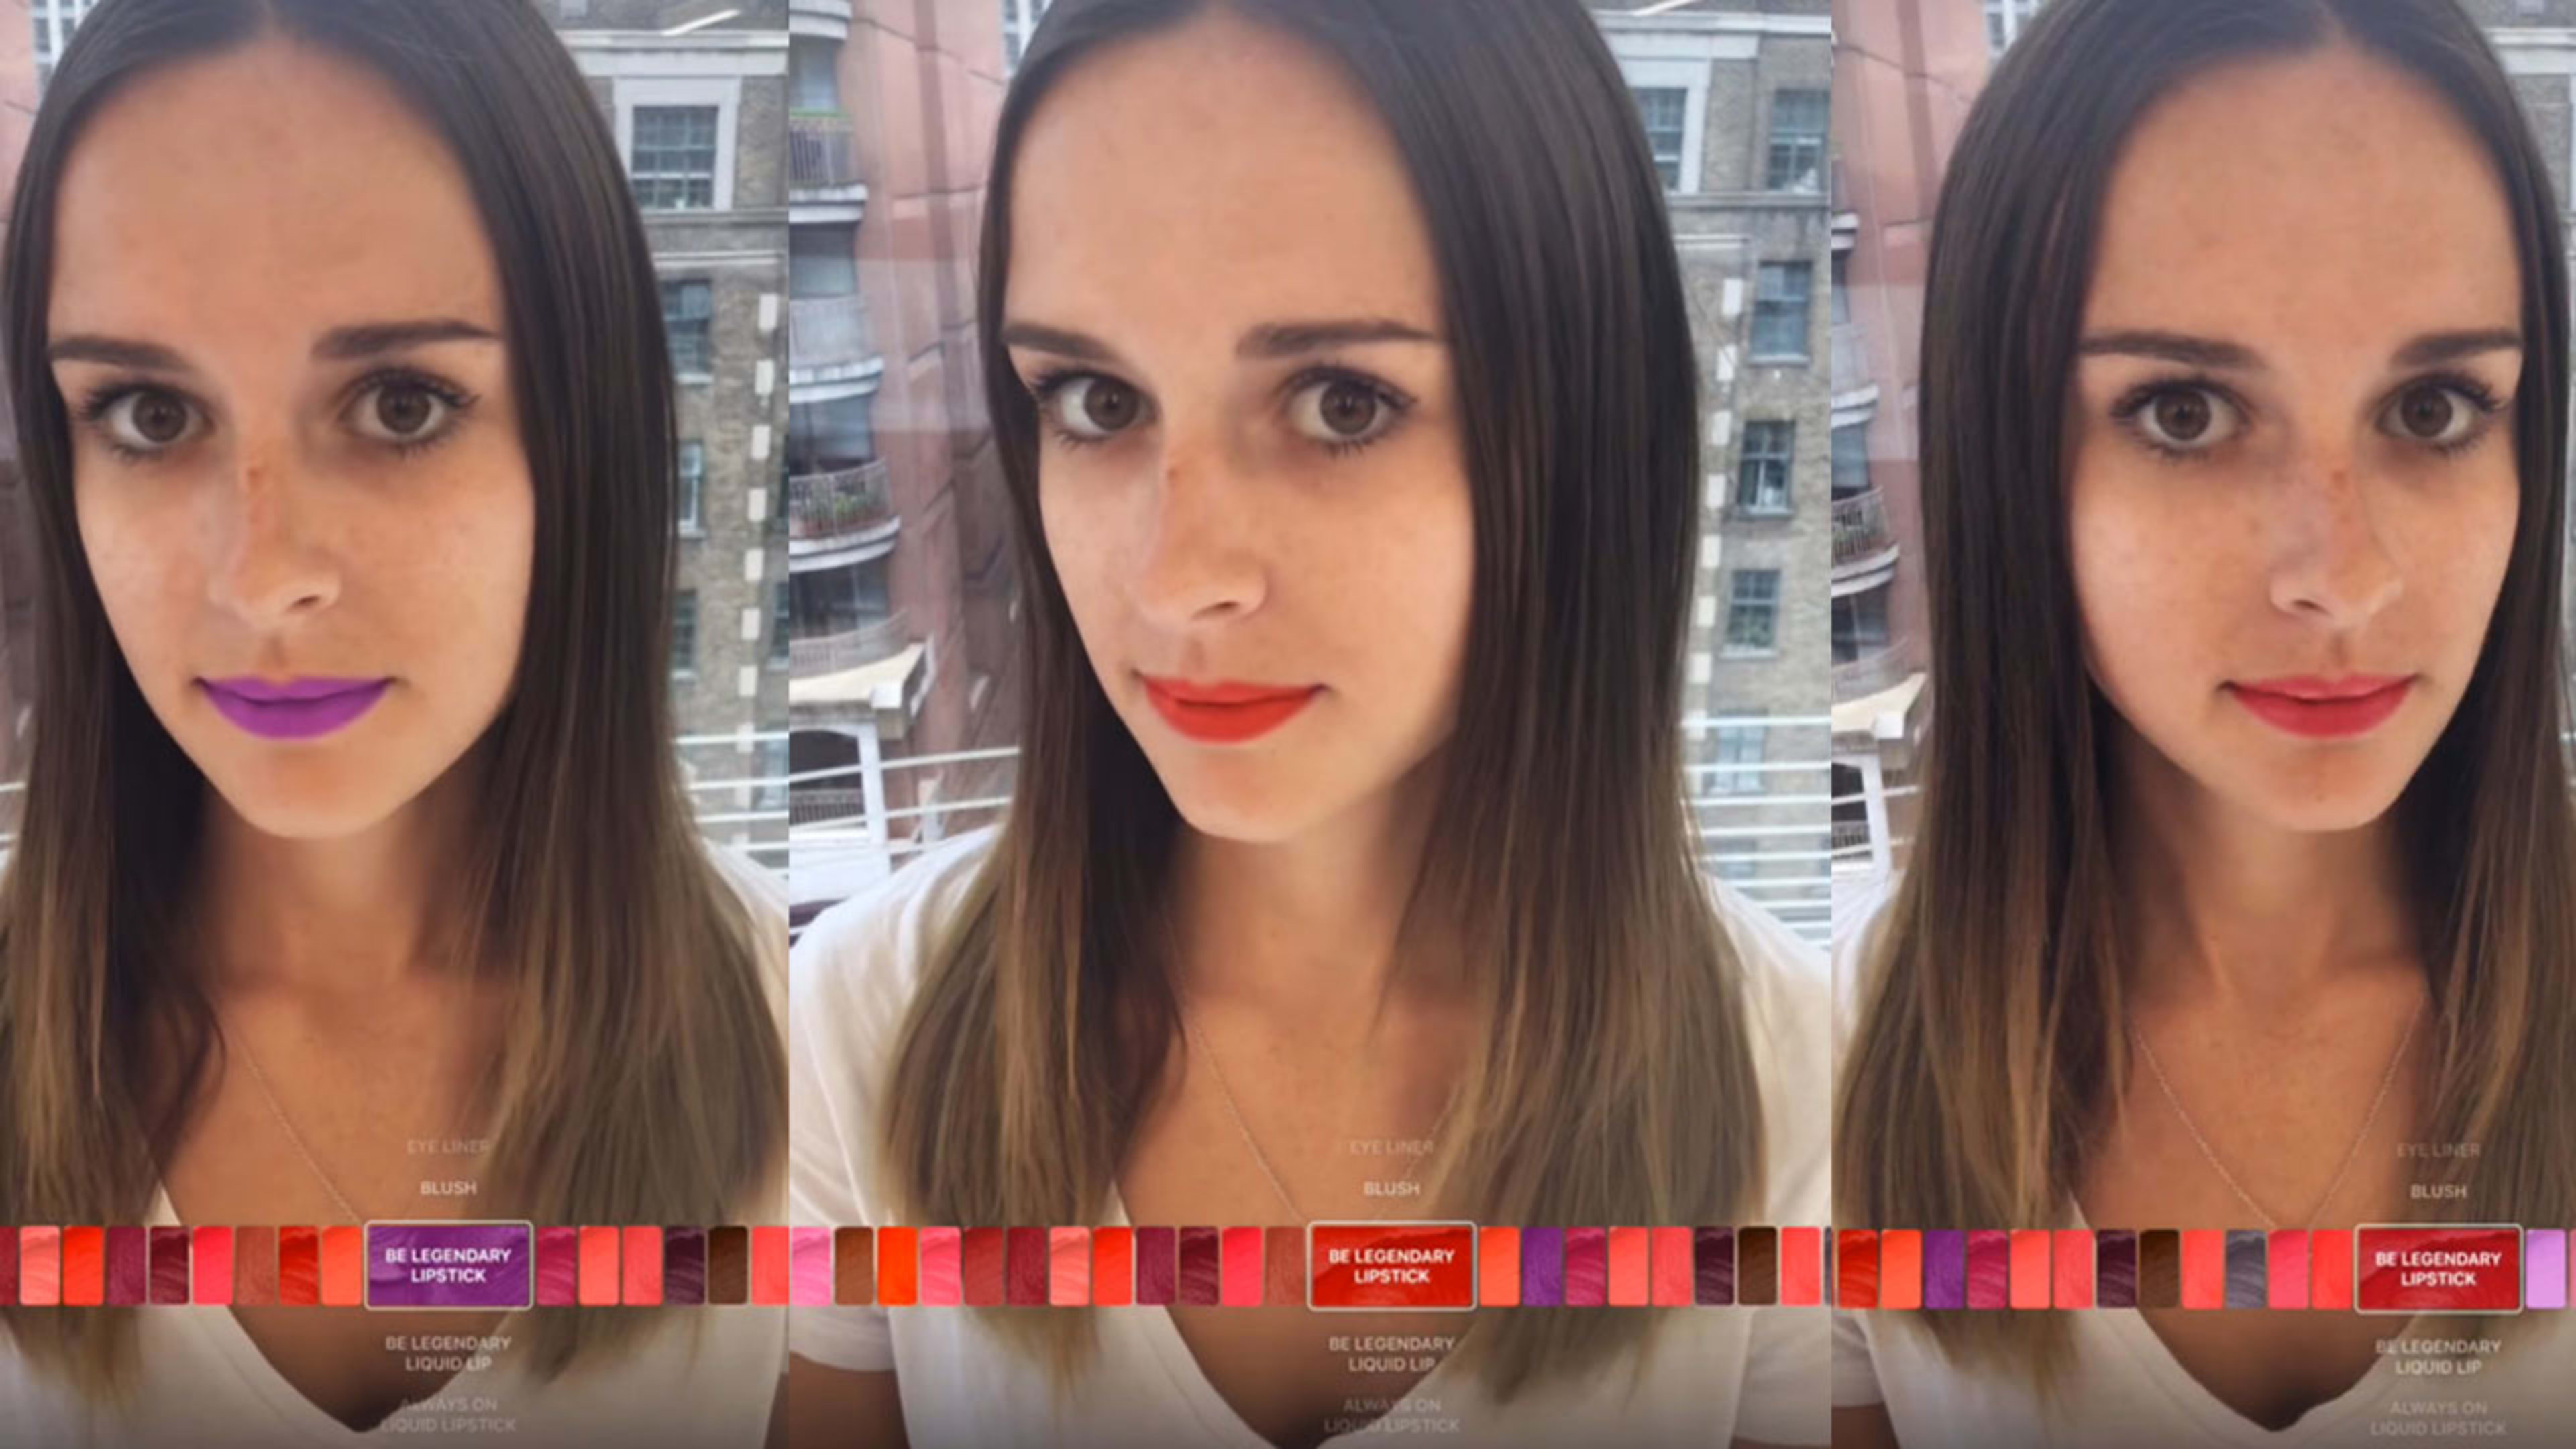 Thanks to Apple’s augmented reality tech, you may never have to apply lipstick in-store again